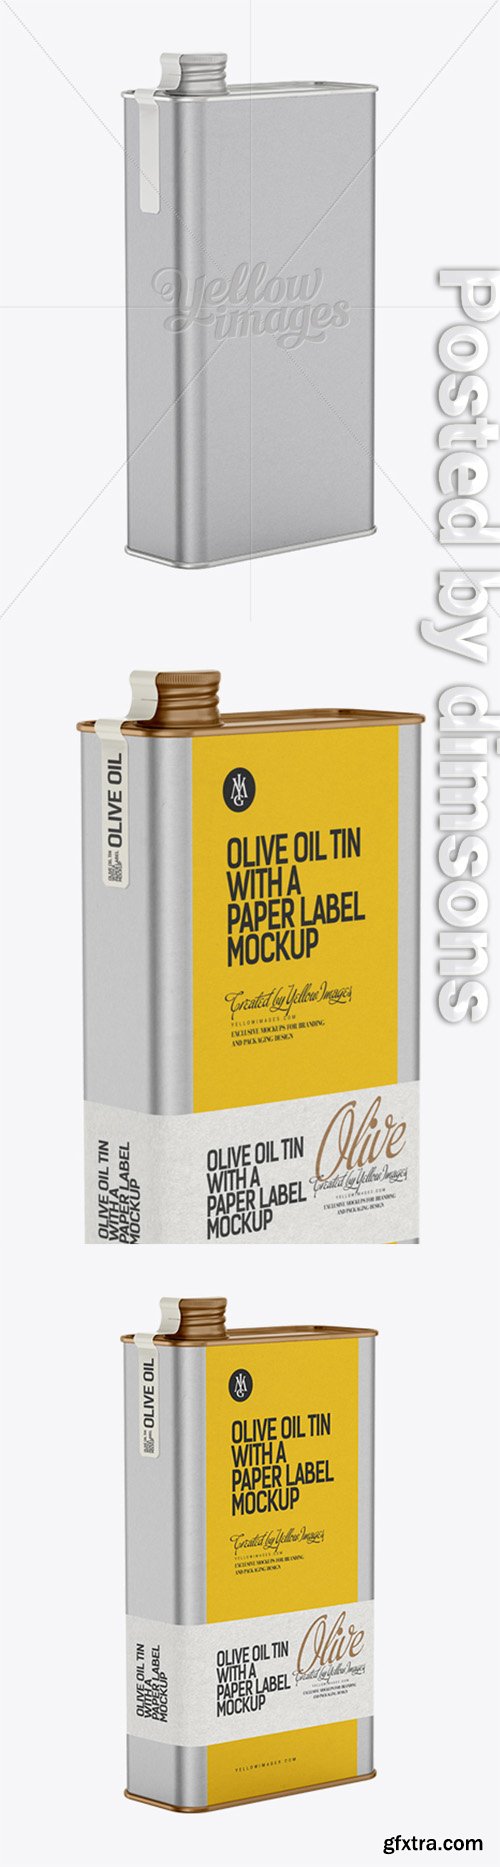 Olive Oil Tin with a Paper Label Mockup 11905